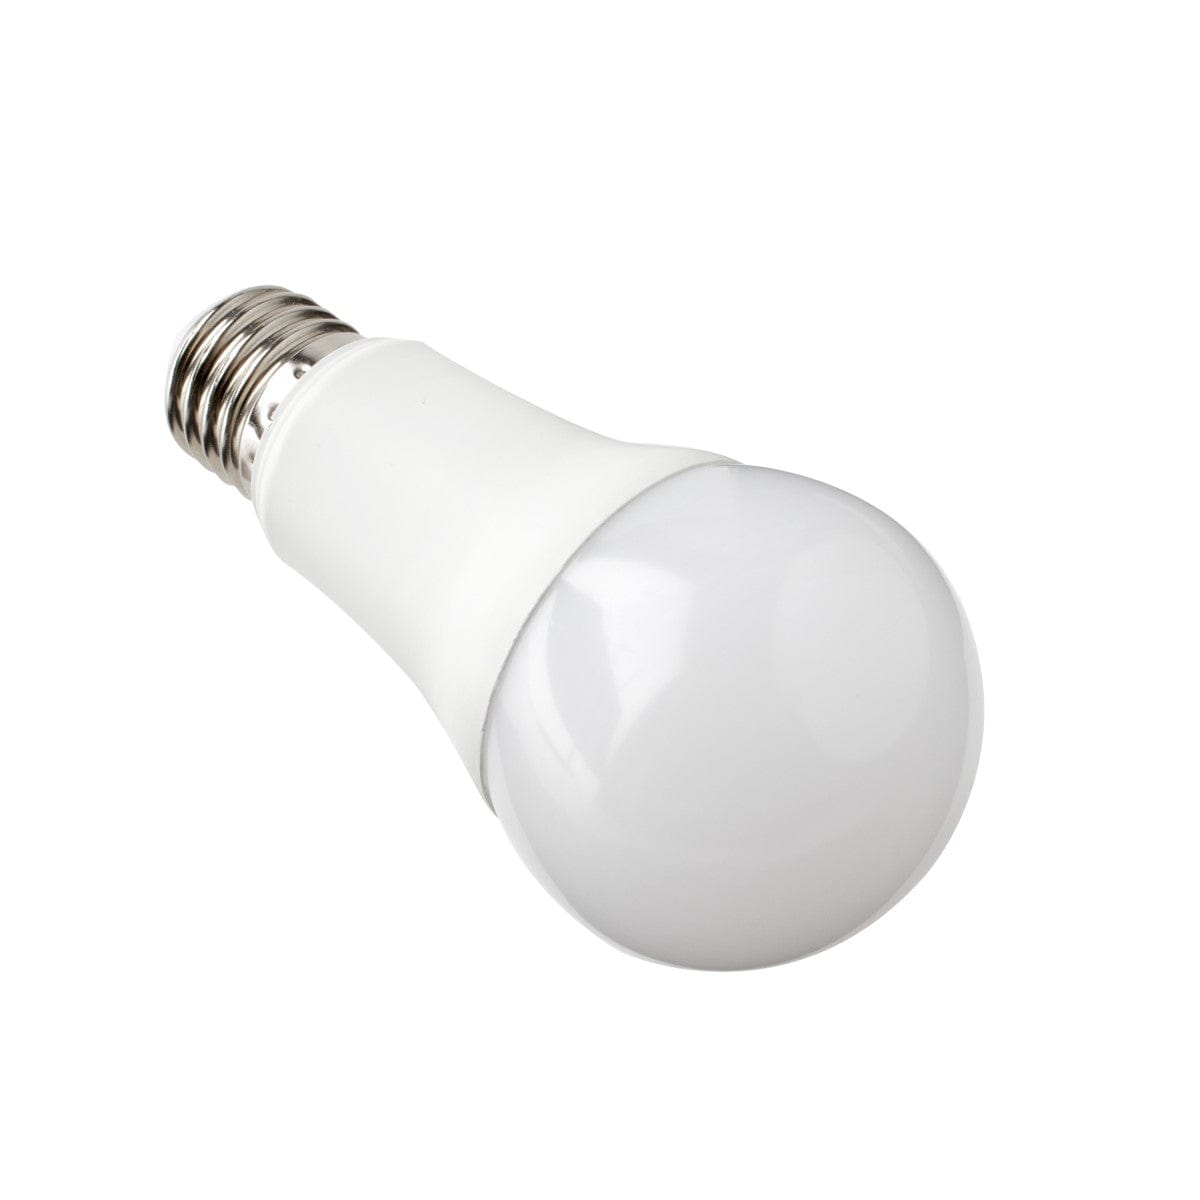 Image of a Compron smart light on a white background